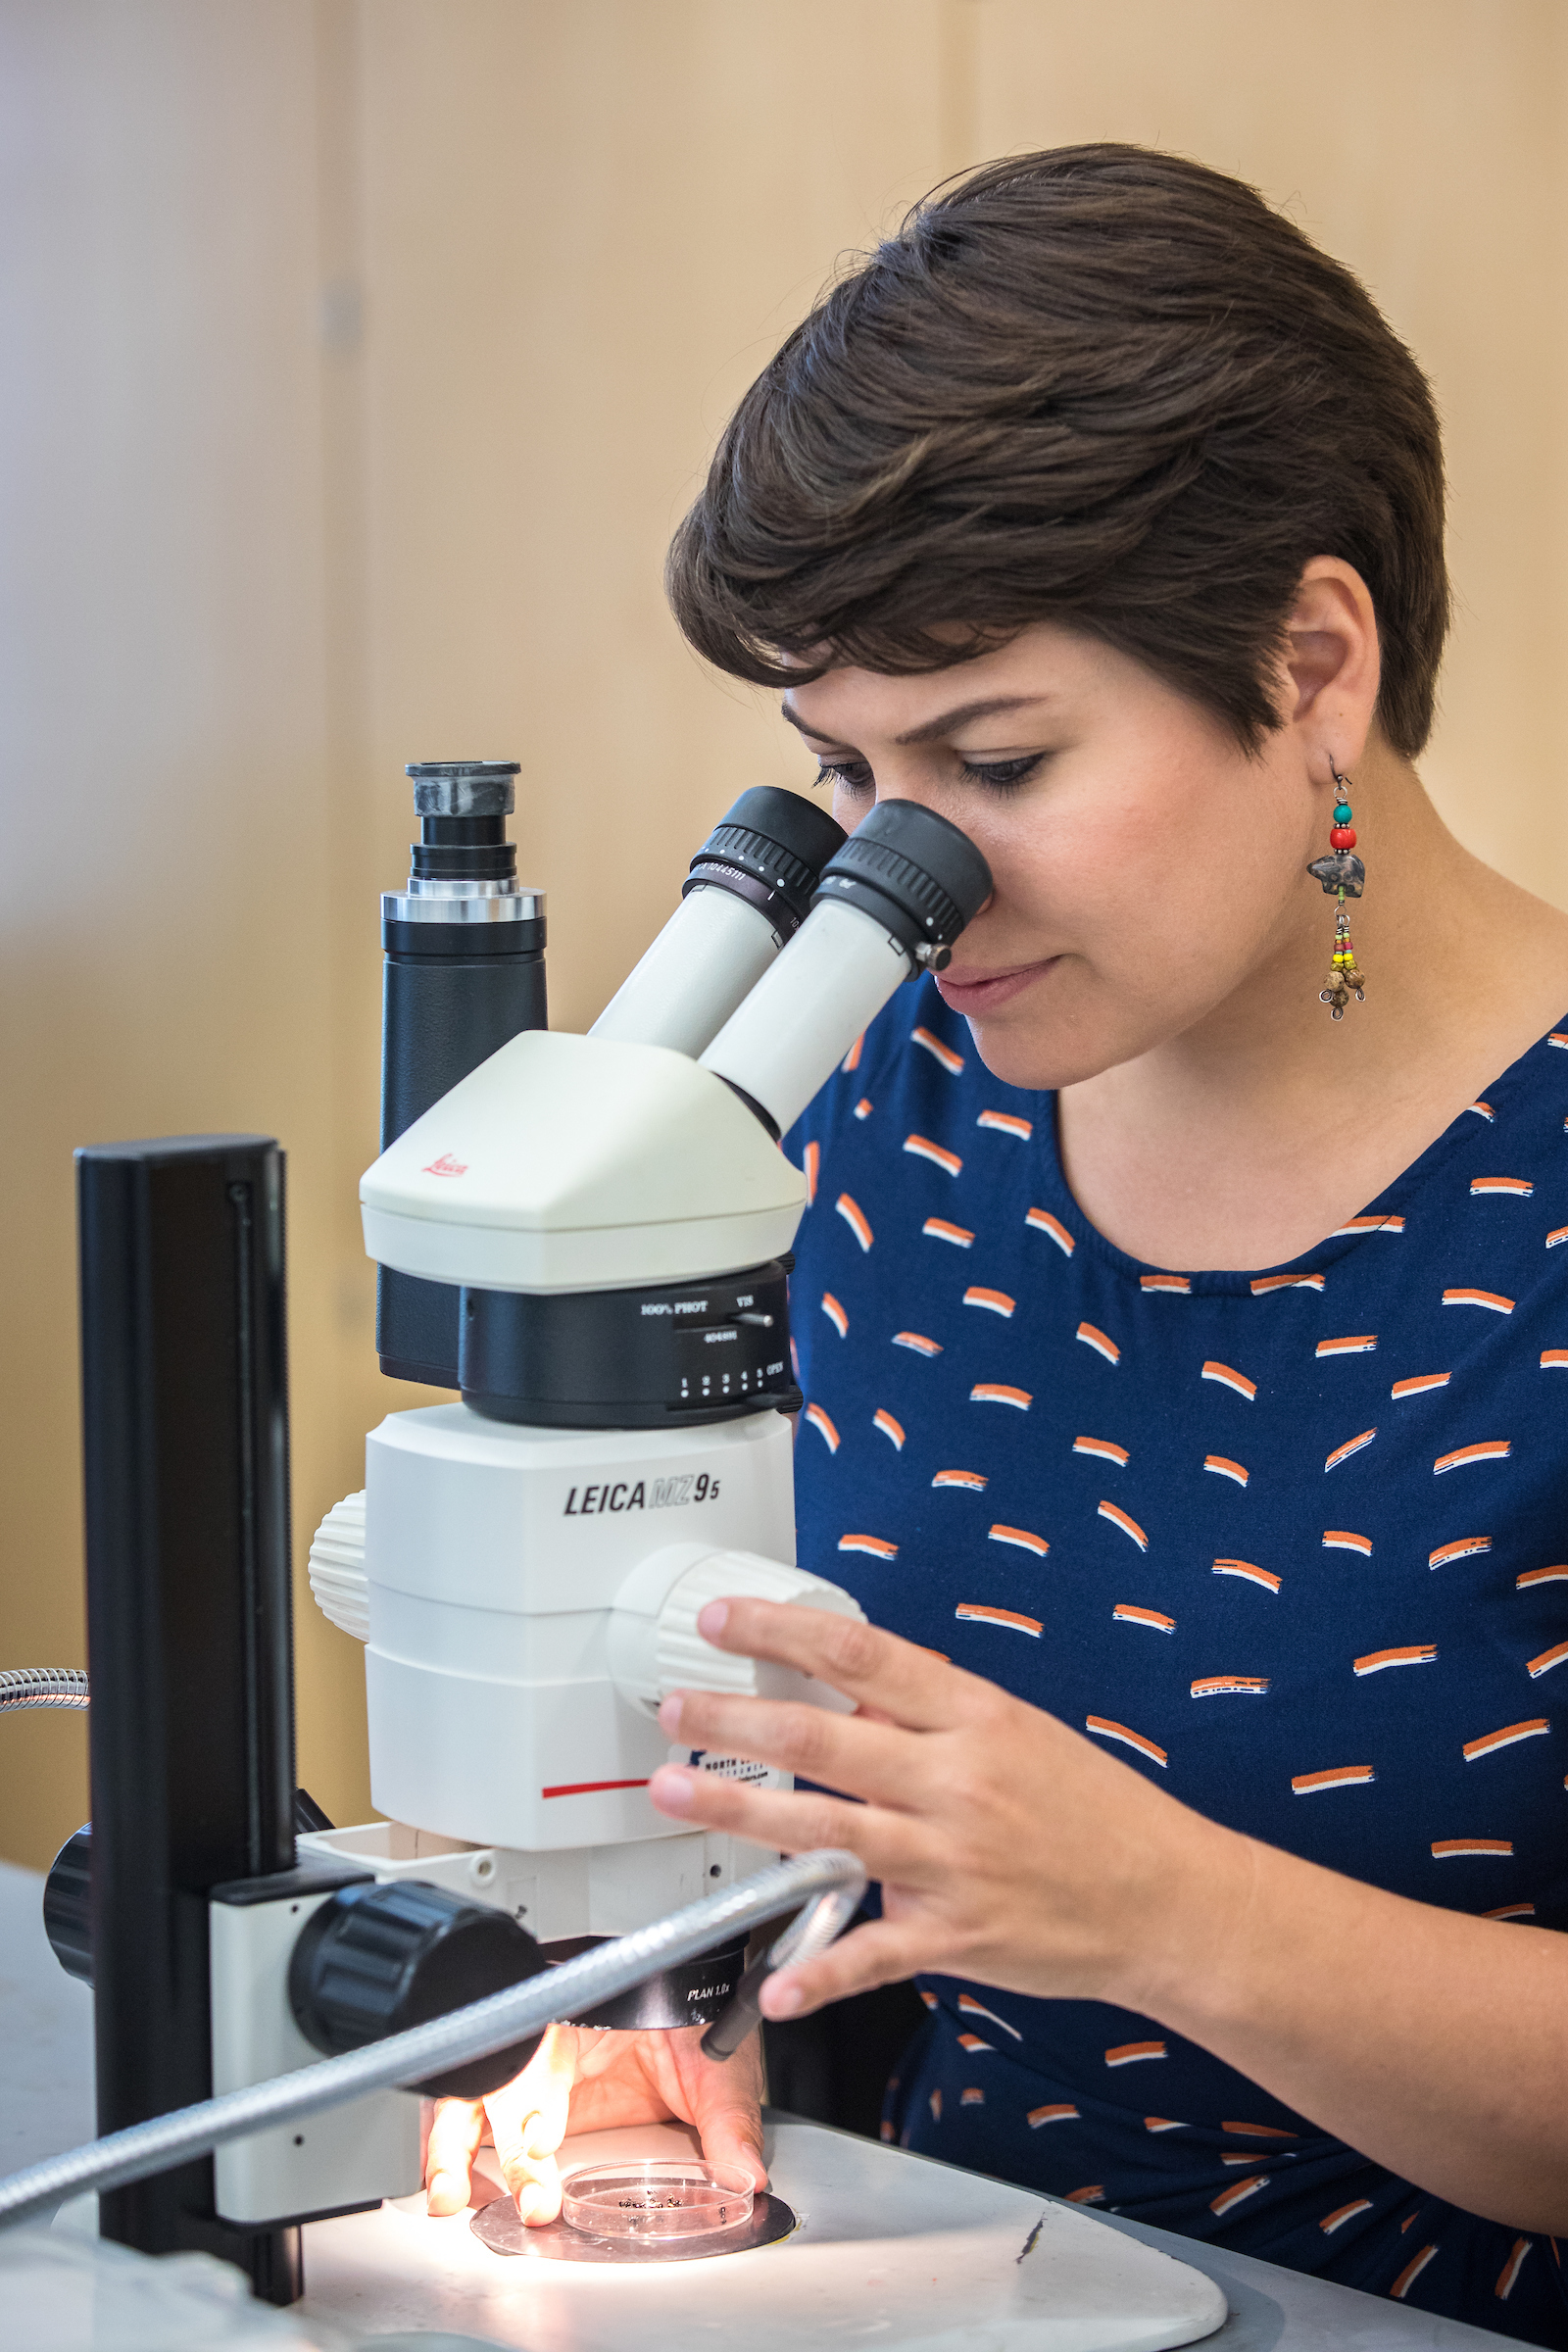 ASU postdoctoral researcher  examines insects through a microscope